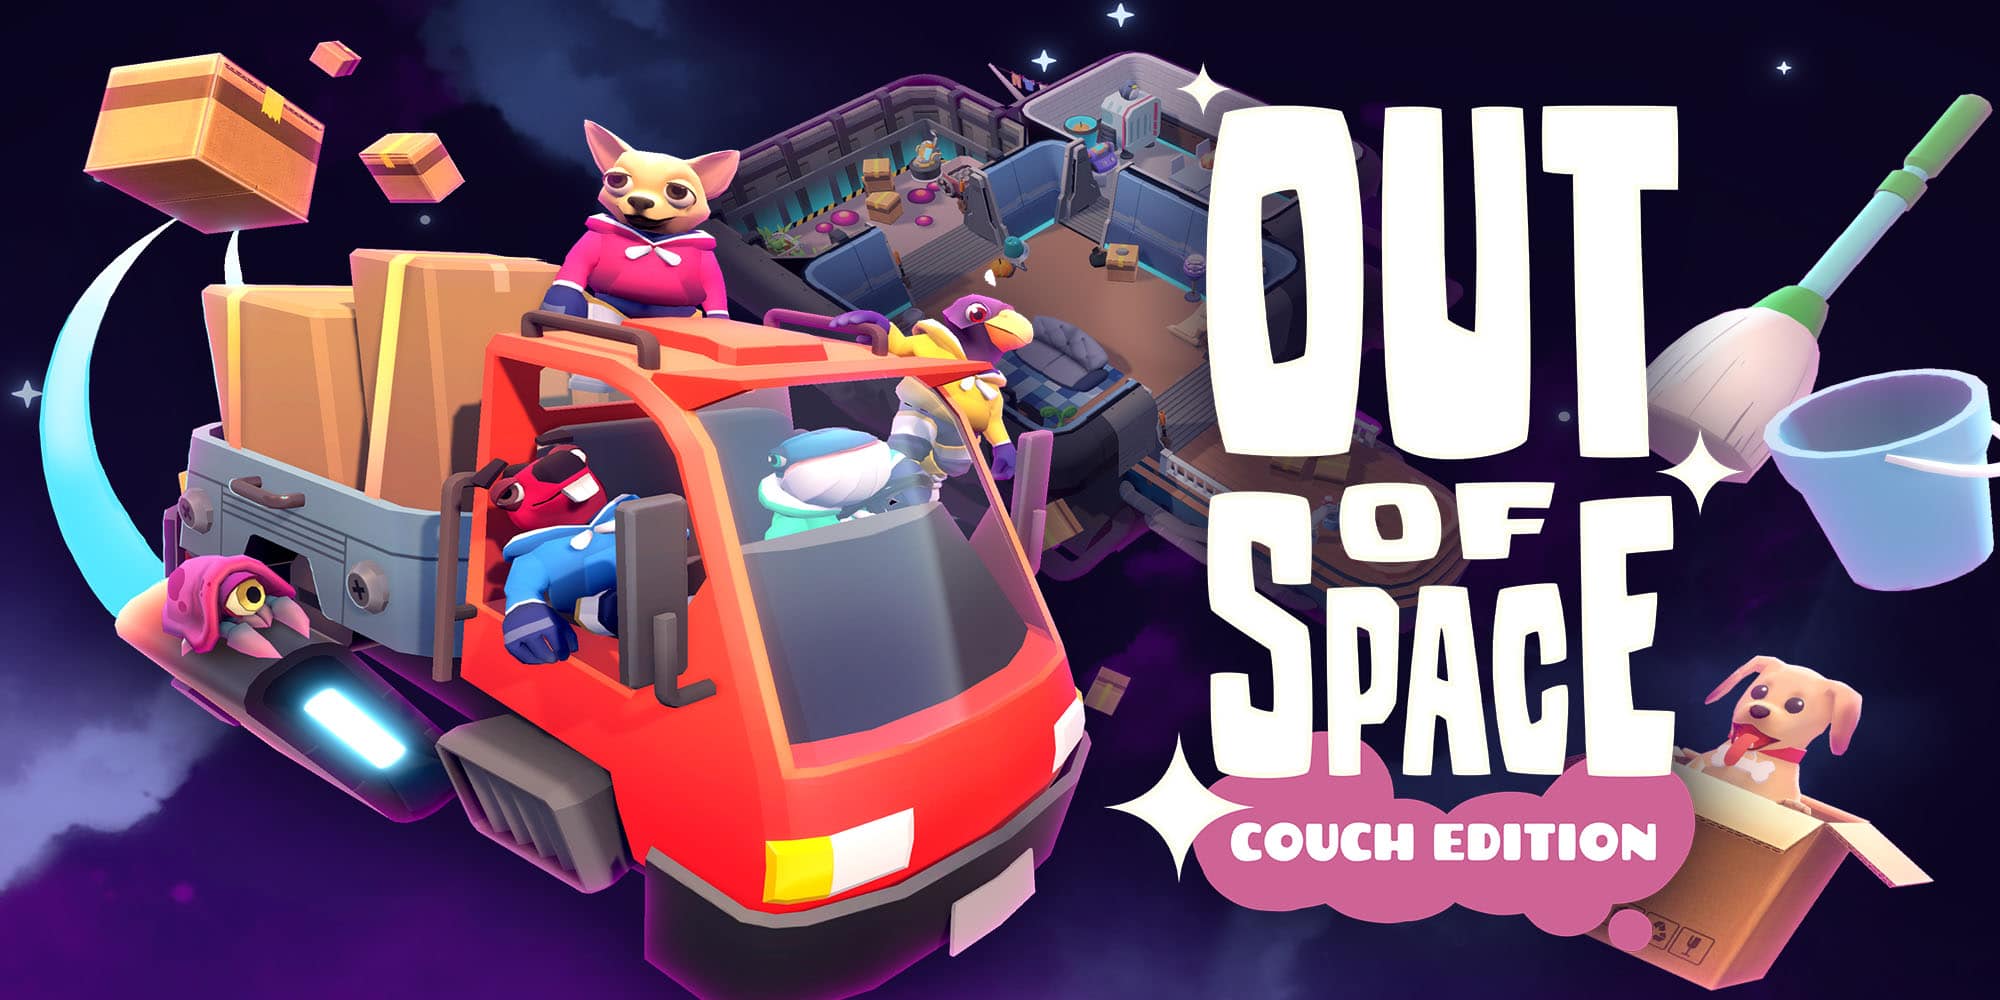 Out of Space: Couch Edition in arrivo il 25 novembre 4